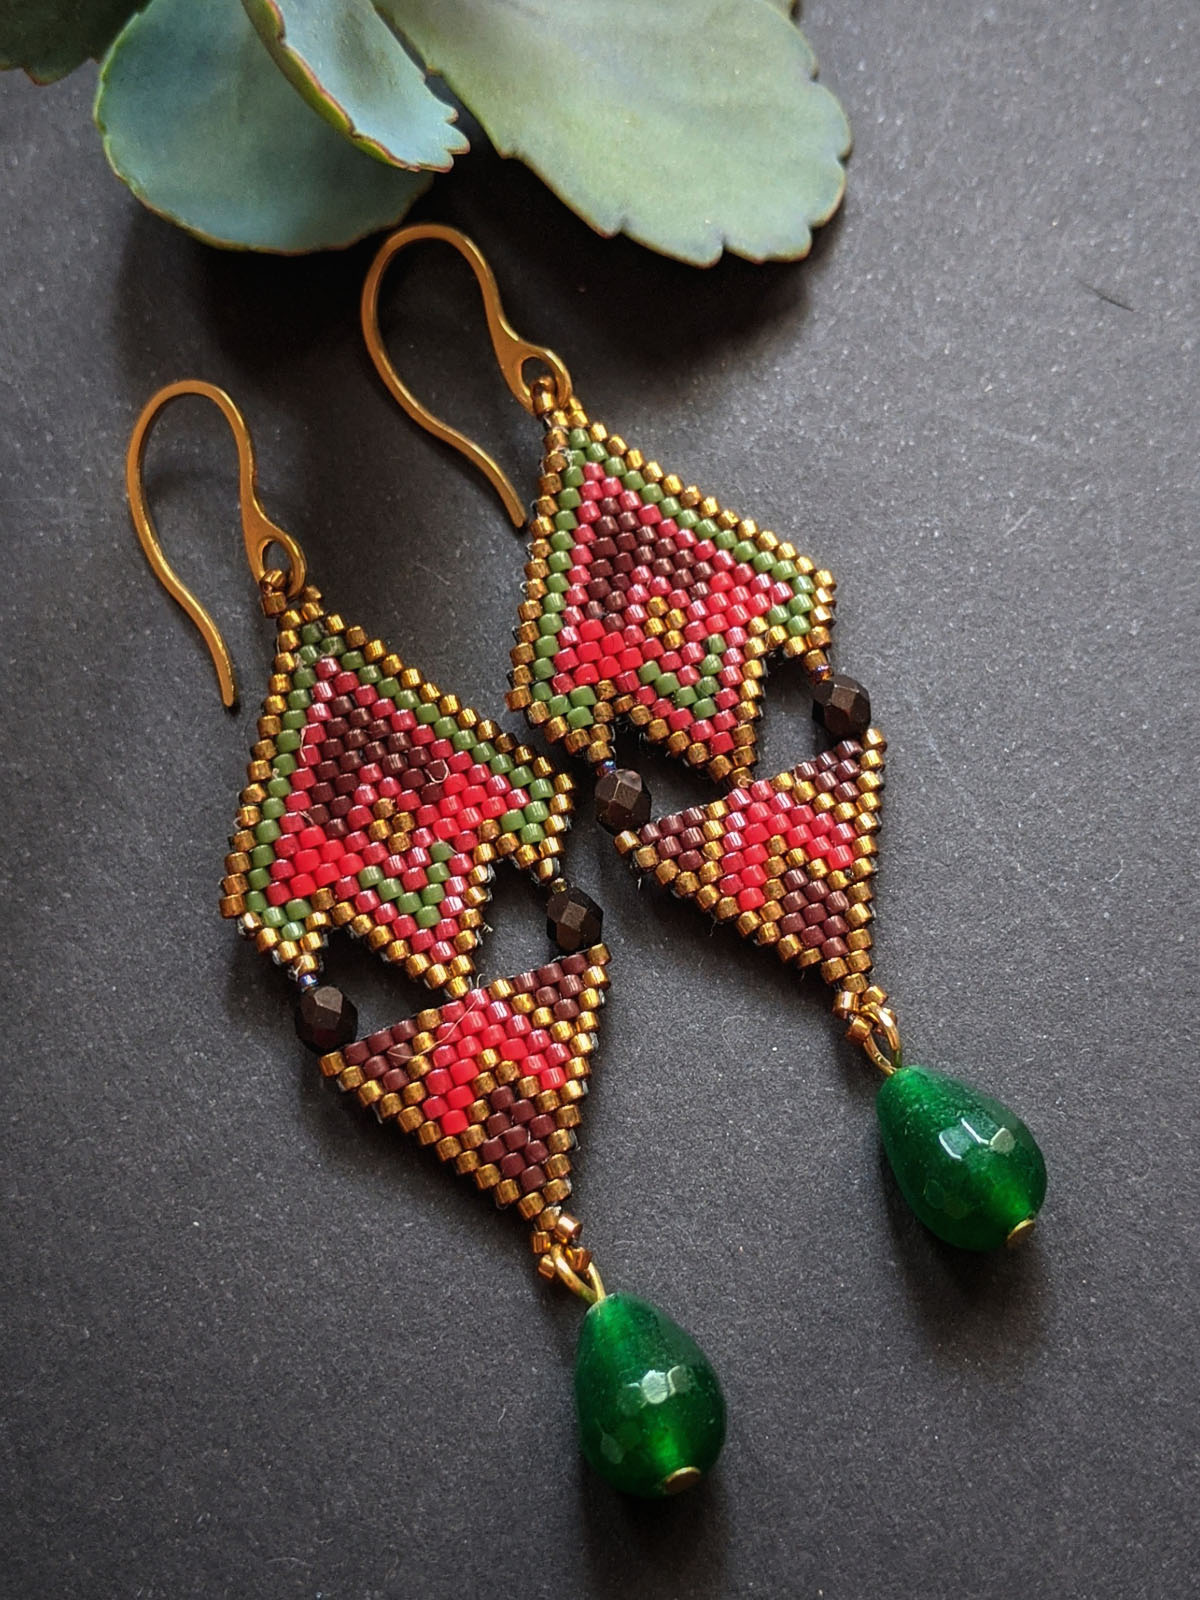 Handmade Beaded Earrings in Red & Brown with green agate drops